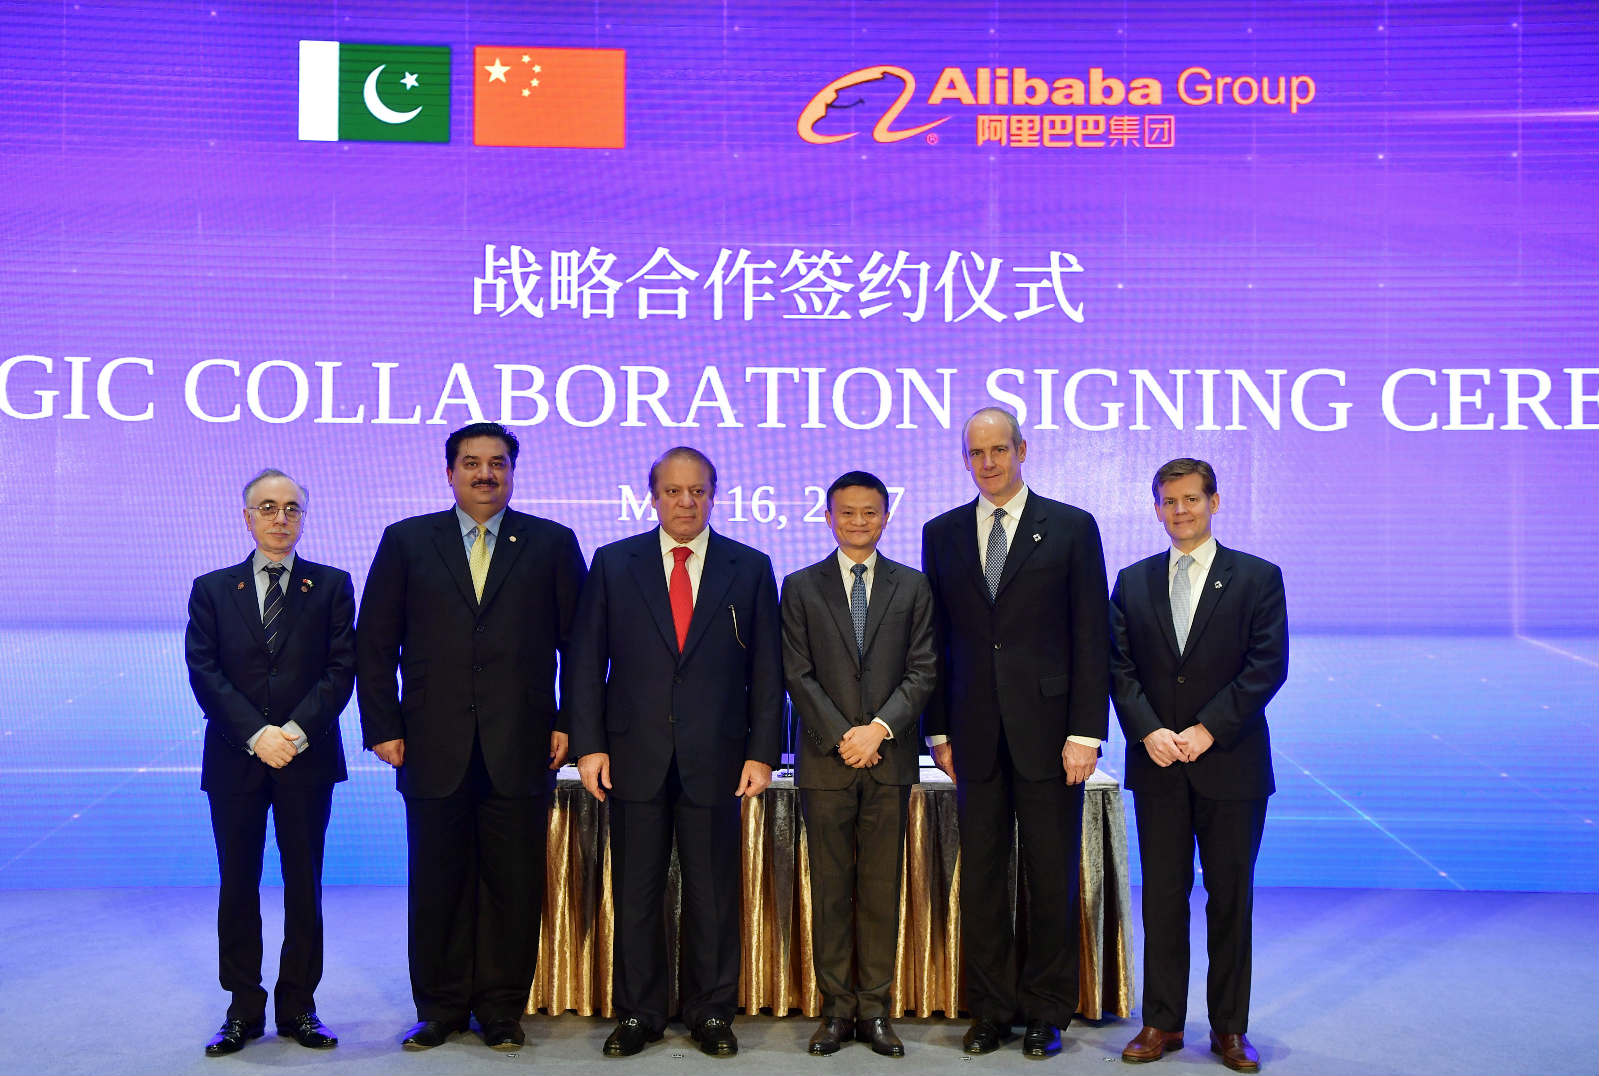 China’s e-commerce giant Alibaba Group signs a memorandum of understanding with Pakistan at the headquarter of Alibaba in Hangzhou, east China’s Zhejiang province on Tuesday, May 16, 2017. [Photo: wshang.com]